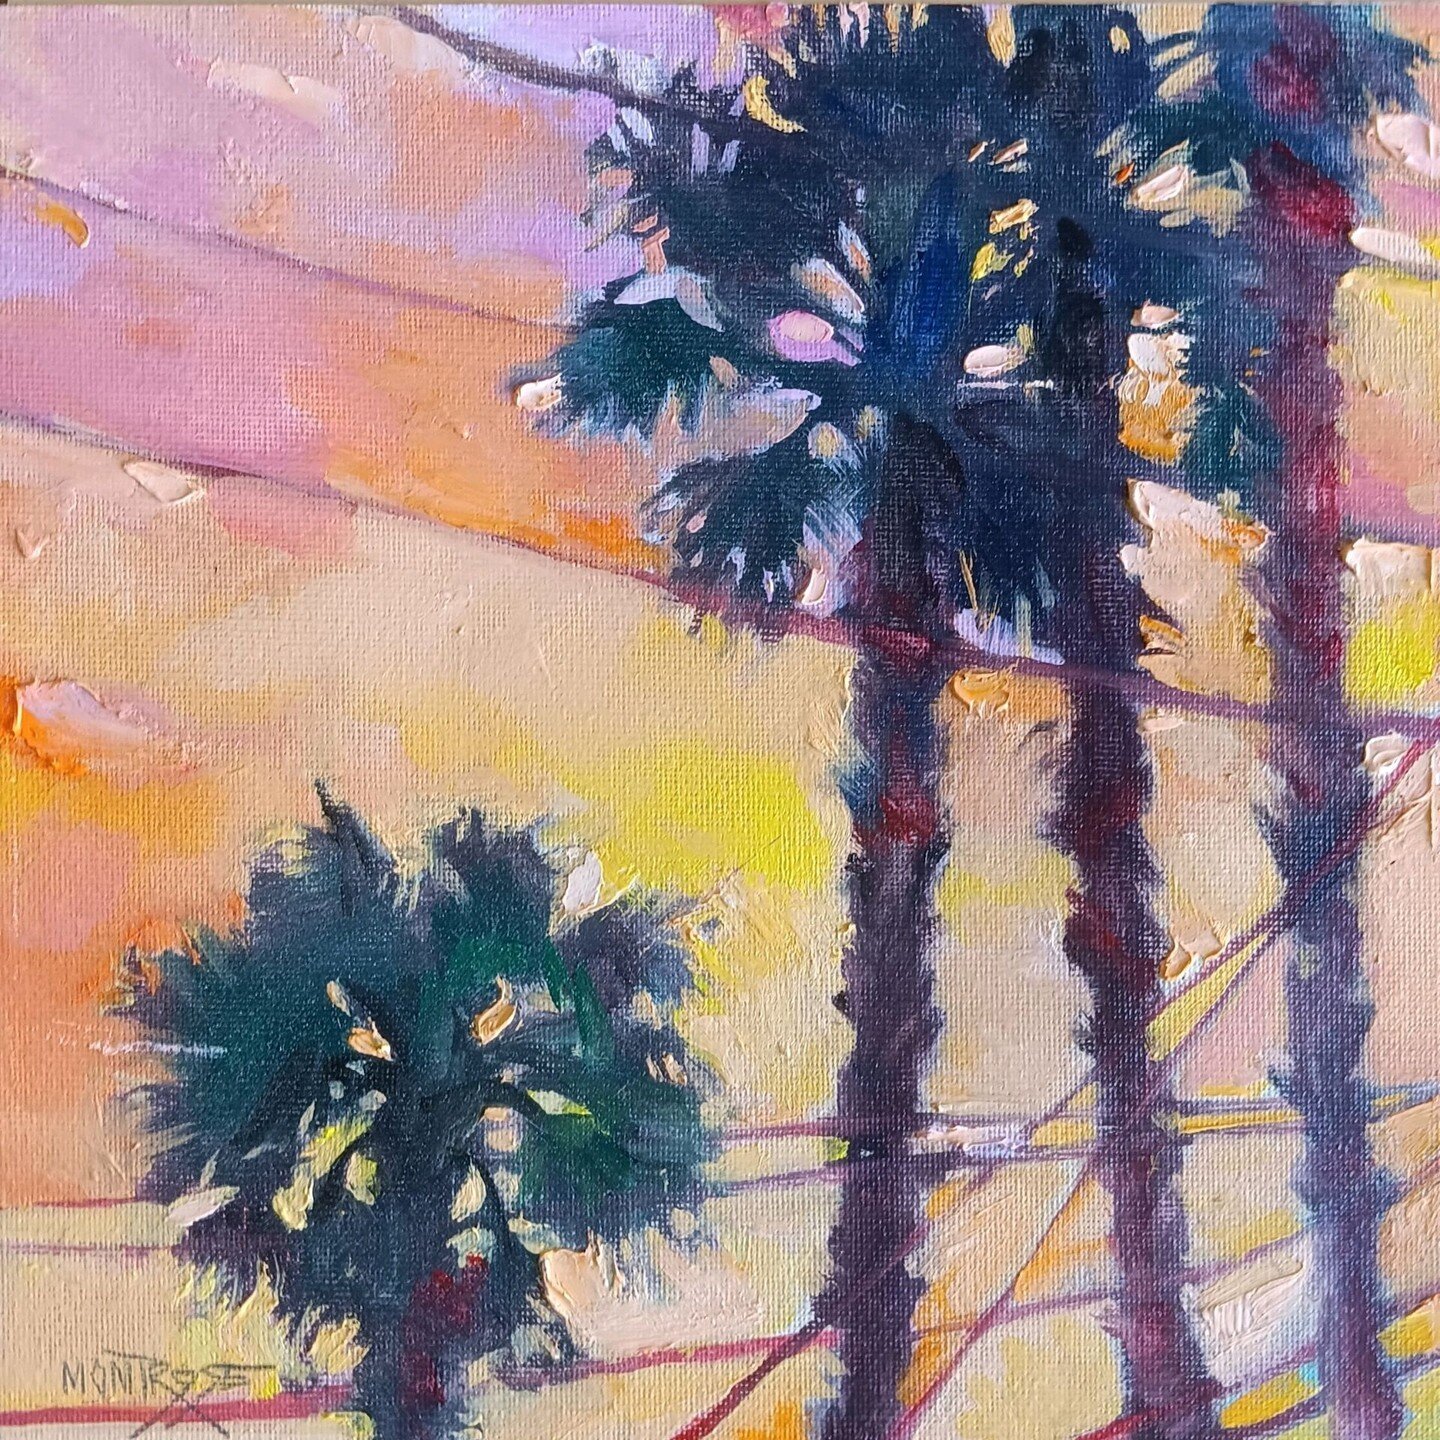 9/100
Had a lot of fun playing around with the sky on this one! Going back to some ideas of mine from a few years ago. 
.
.
@dothe100dayproject 
#the100dayproject2024 #painteveryday #fineartcollecting #artclass #palmtrees #palmtreelove #sandiegoartsc